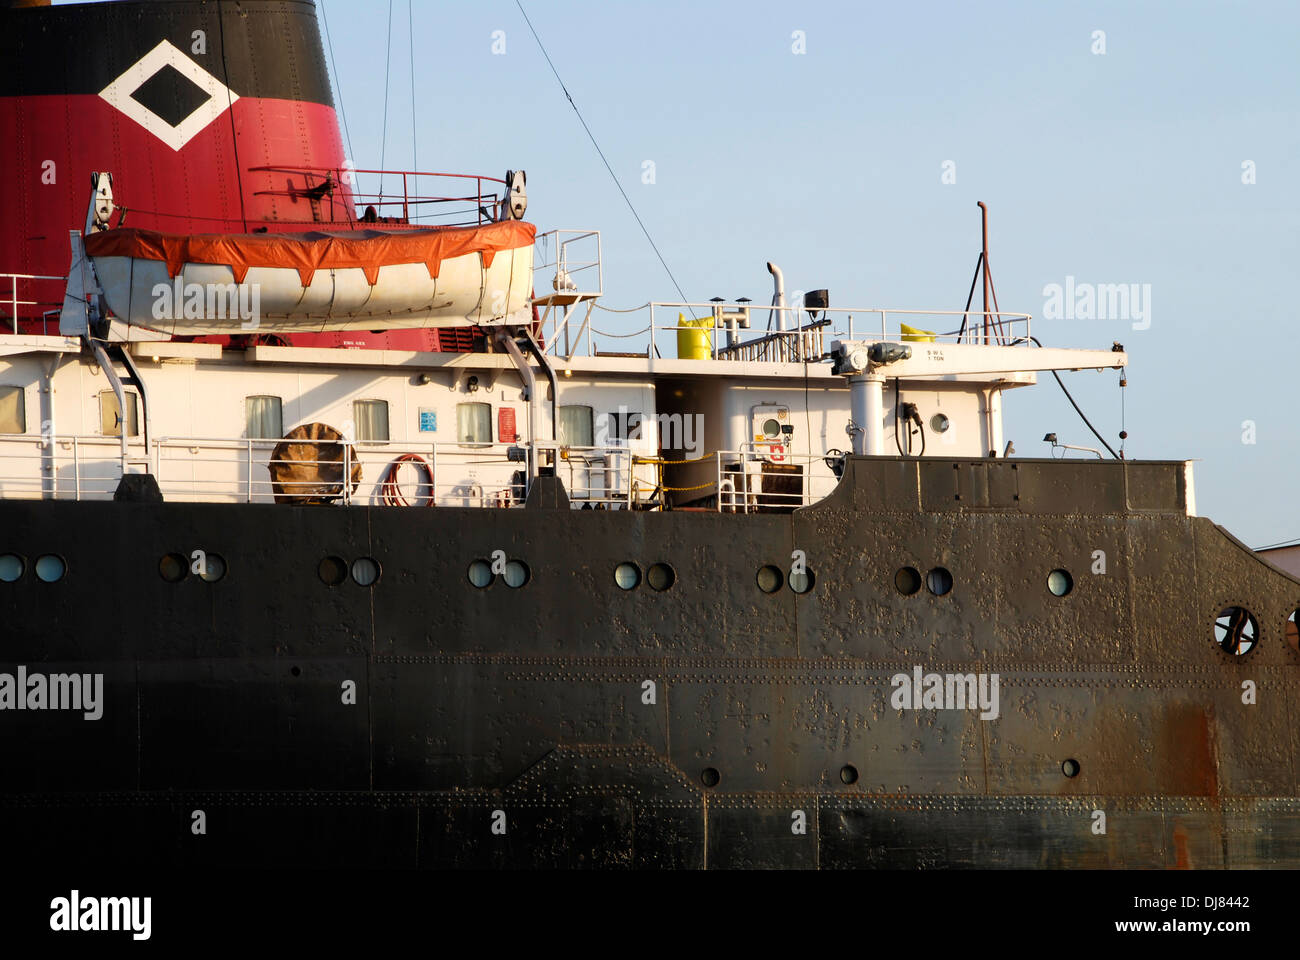 A Great Lakes freighter moored for the winter in the Port of Toronto Stock Photo